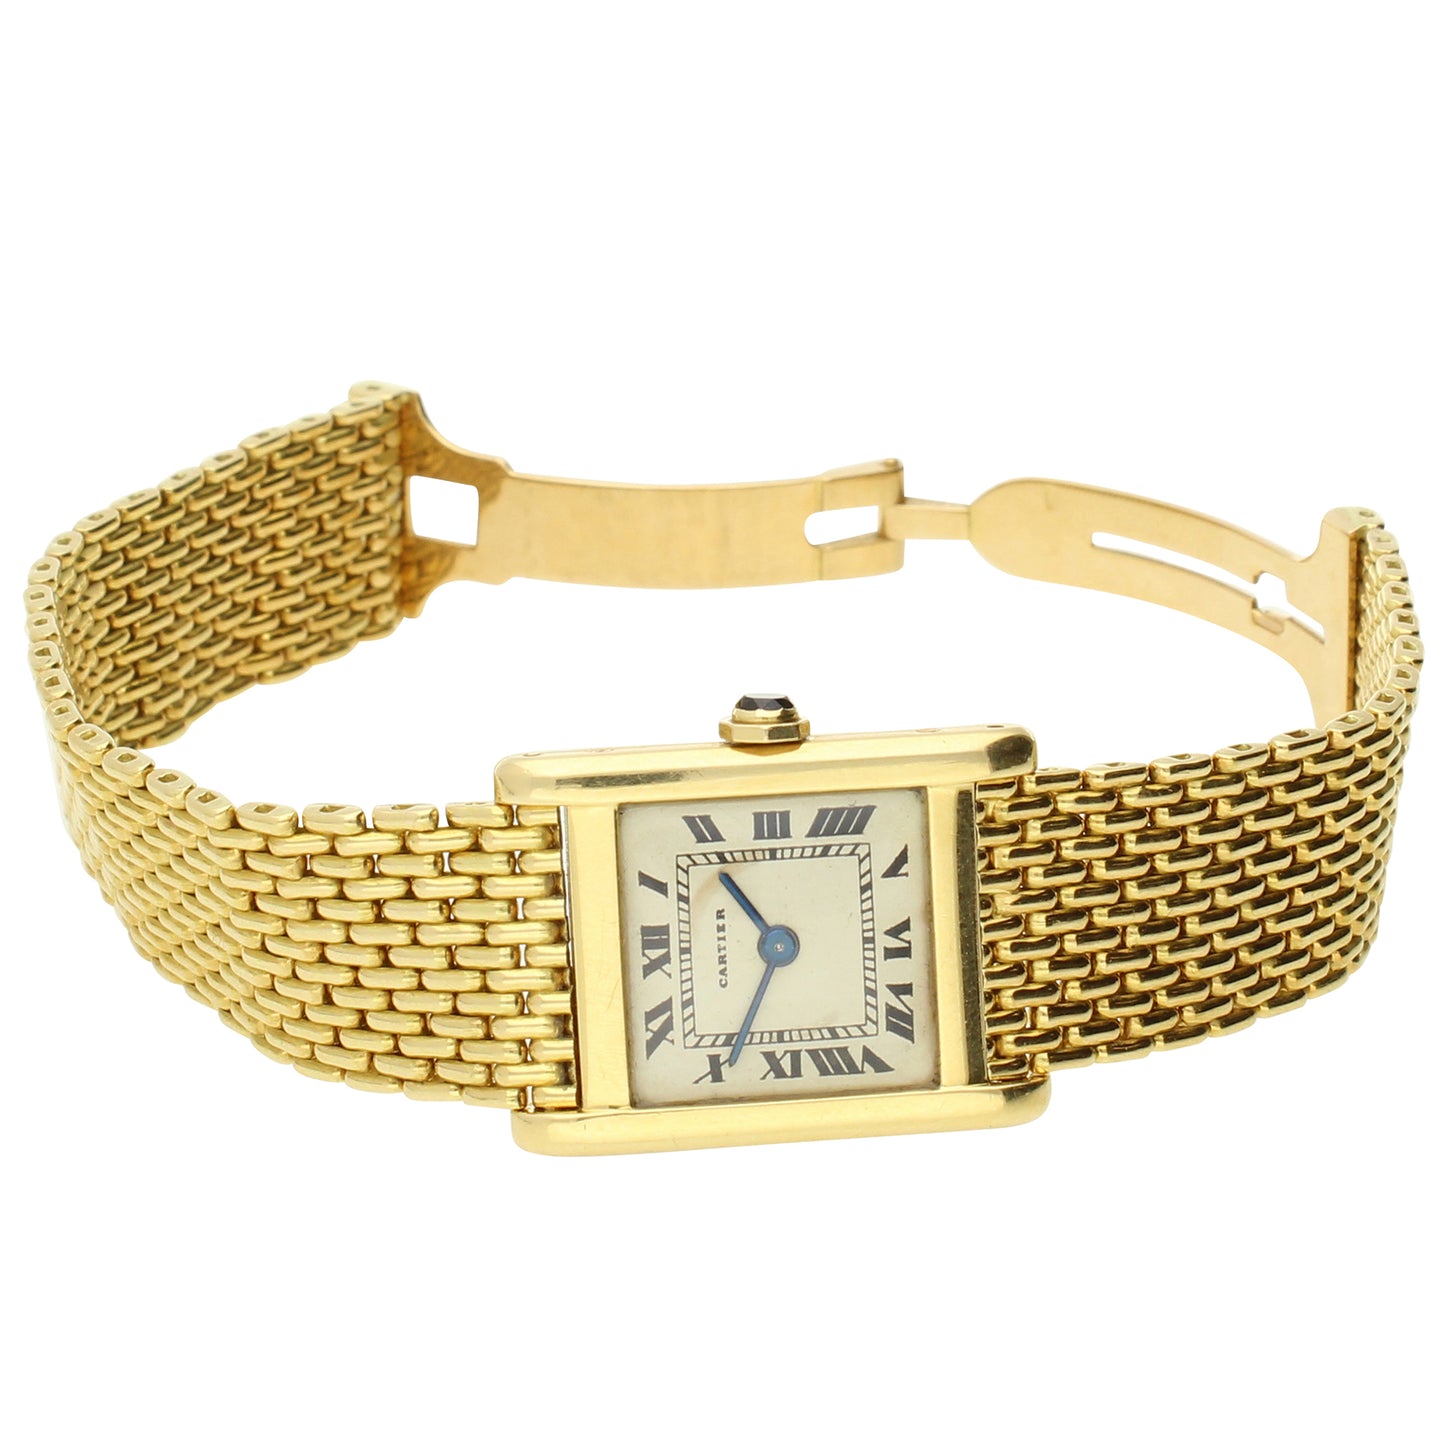 18ct yellow gold Cartier Tank Normale wristwatch. Made 1950's